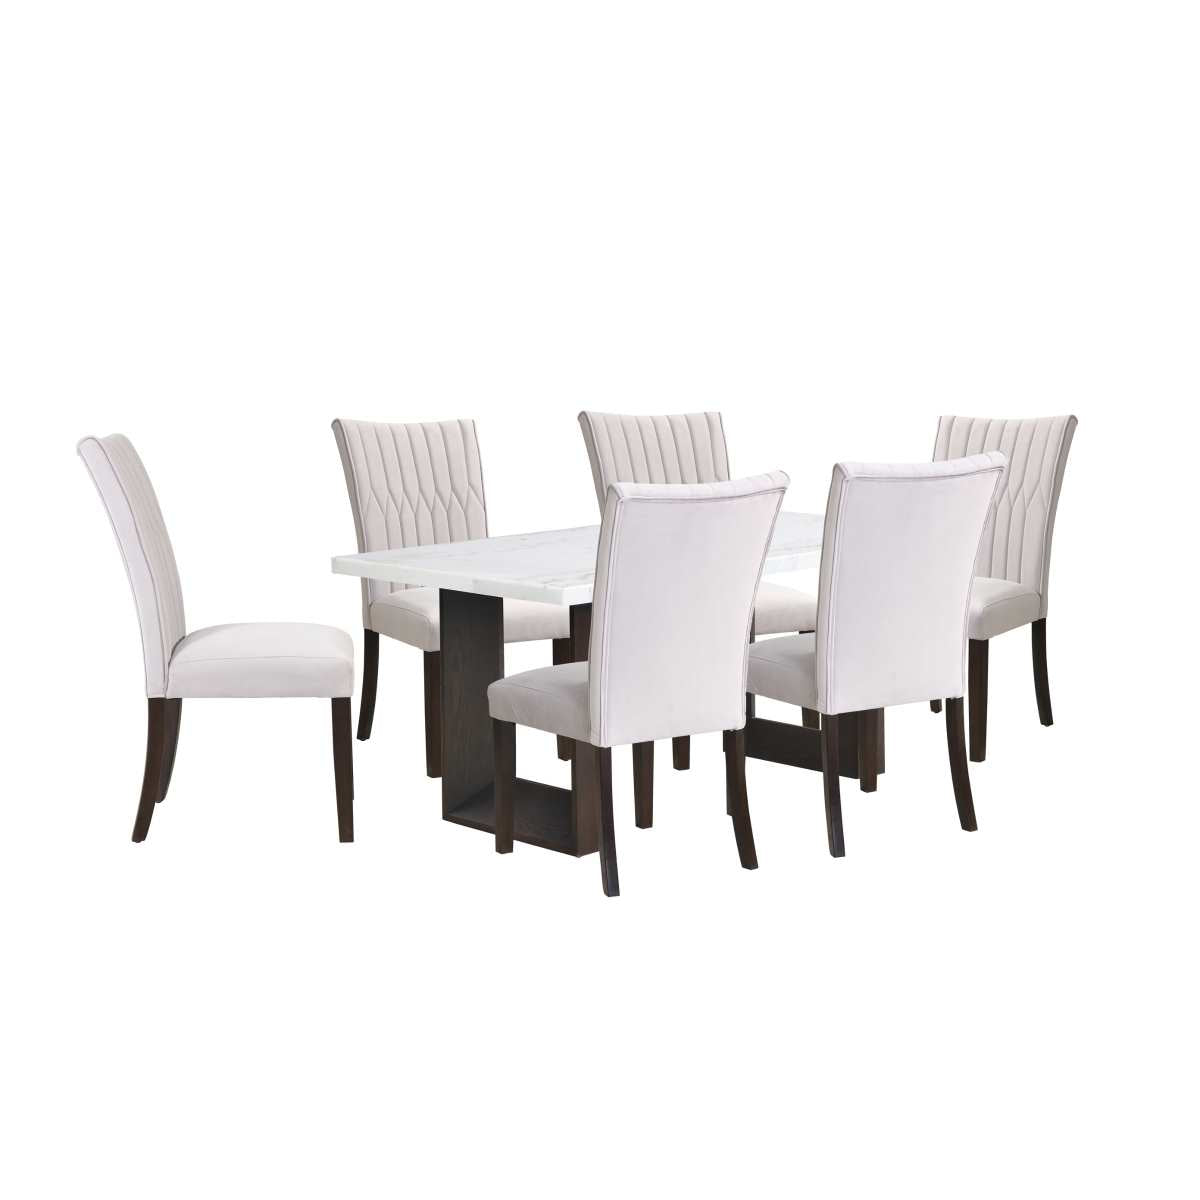 Hyperion Dining Collection 5766